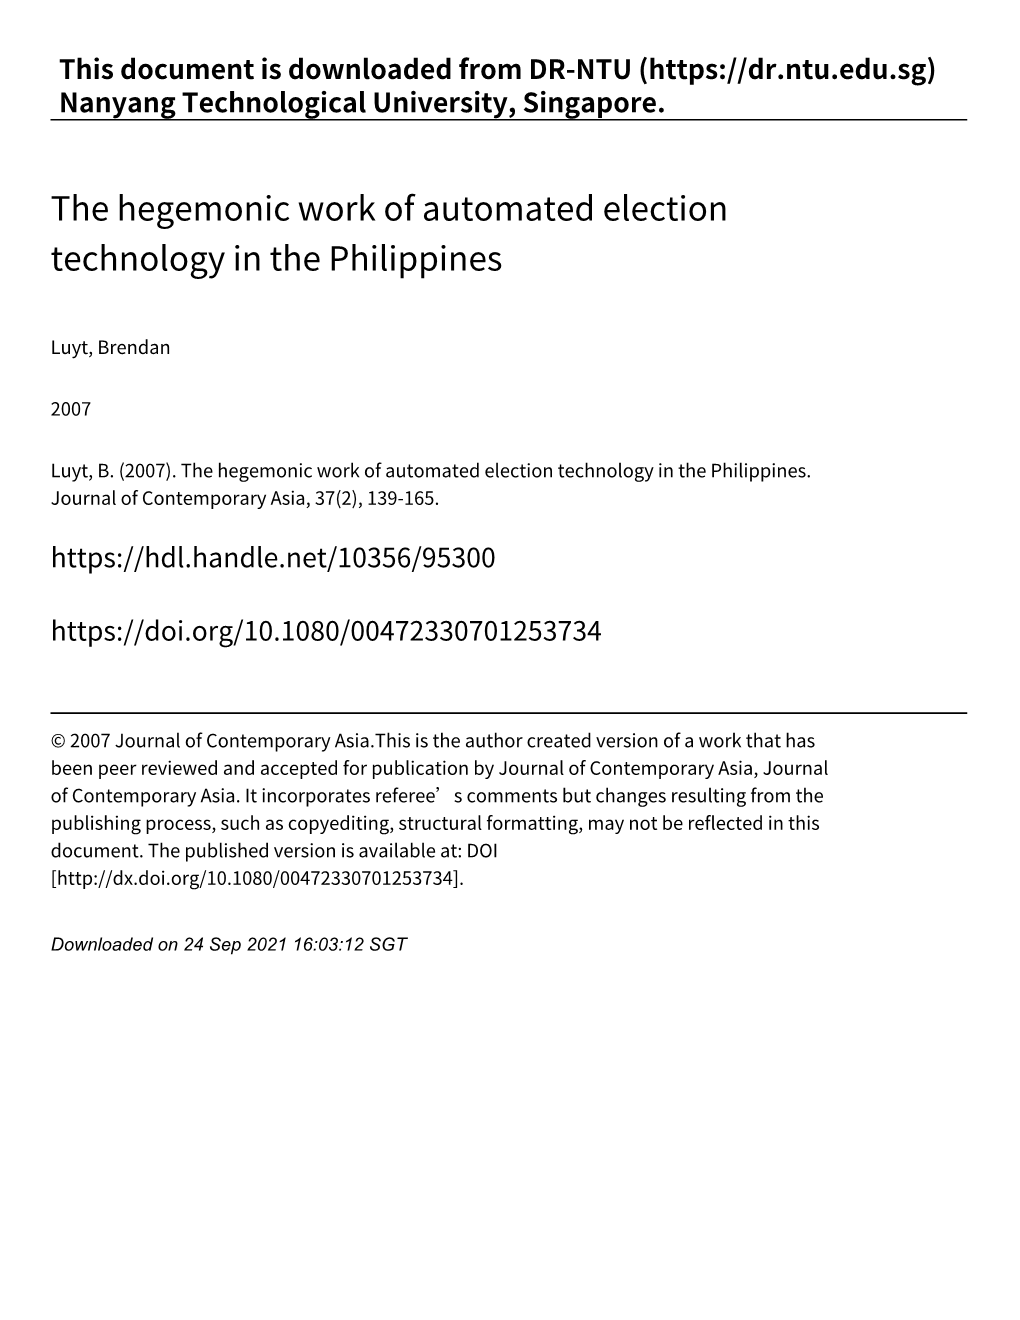 The Hegemonic Work of Automated Election Technology in the Philippines